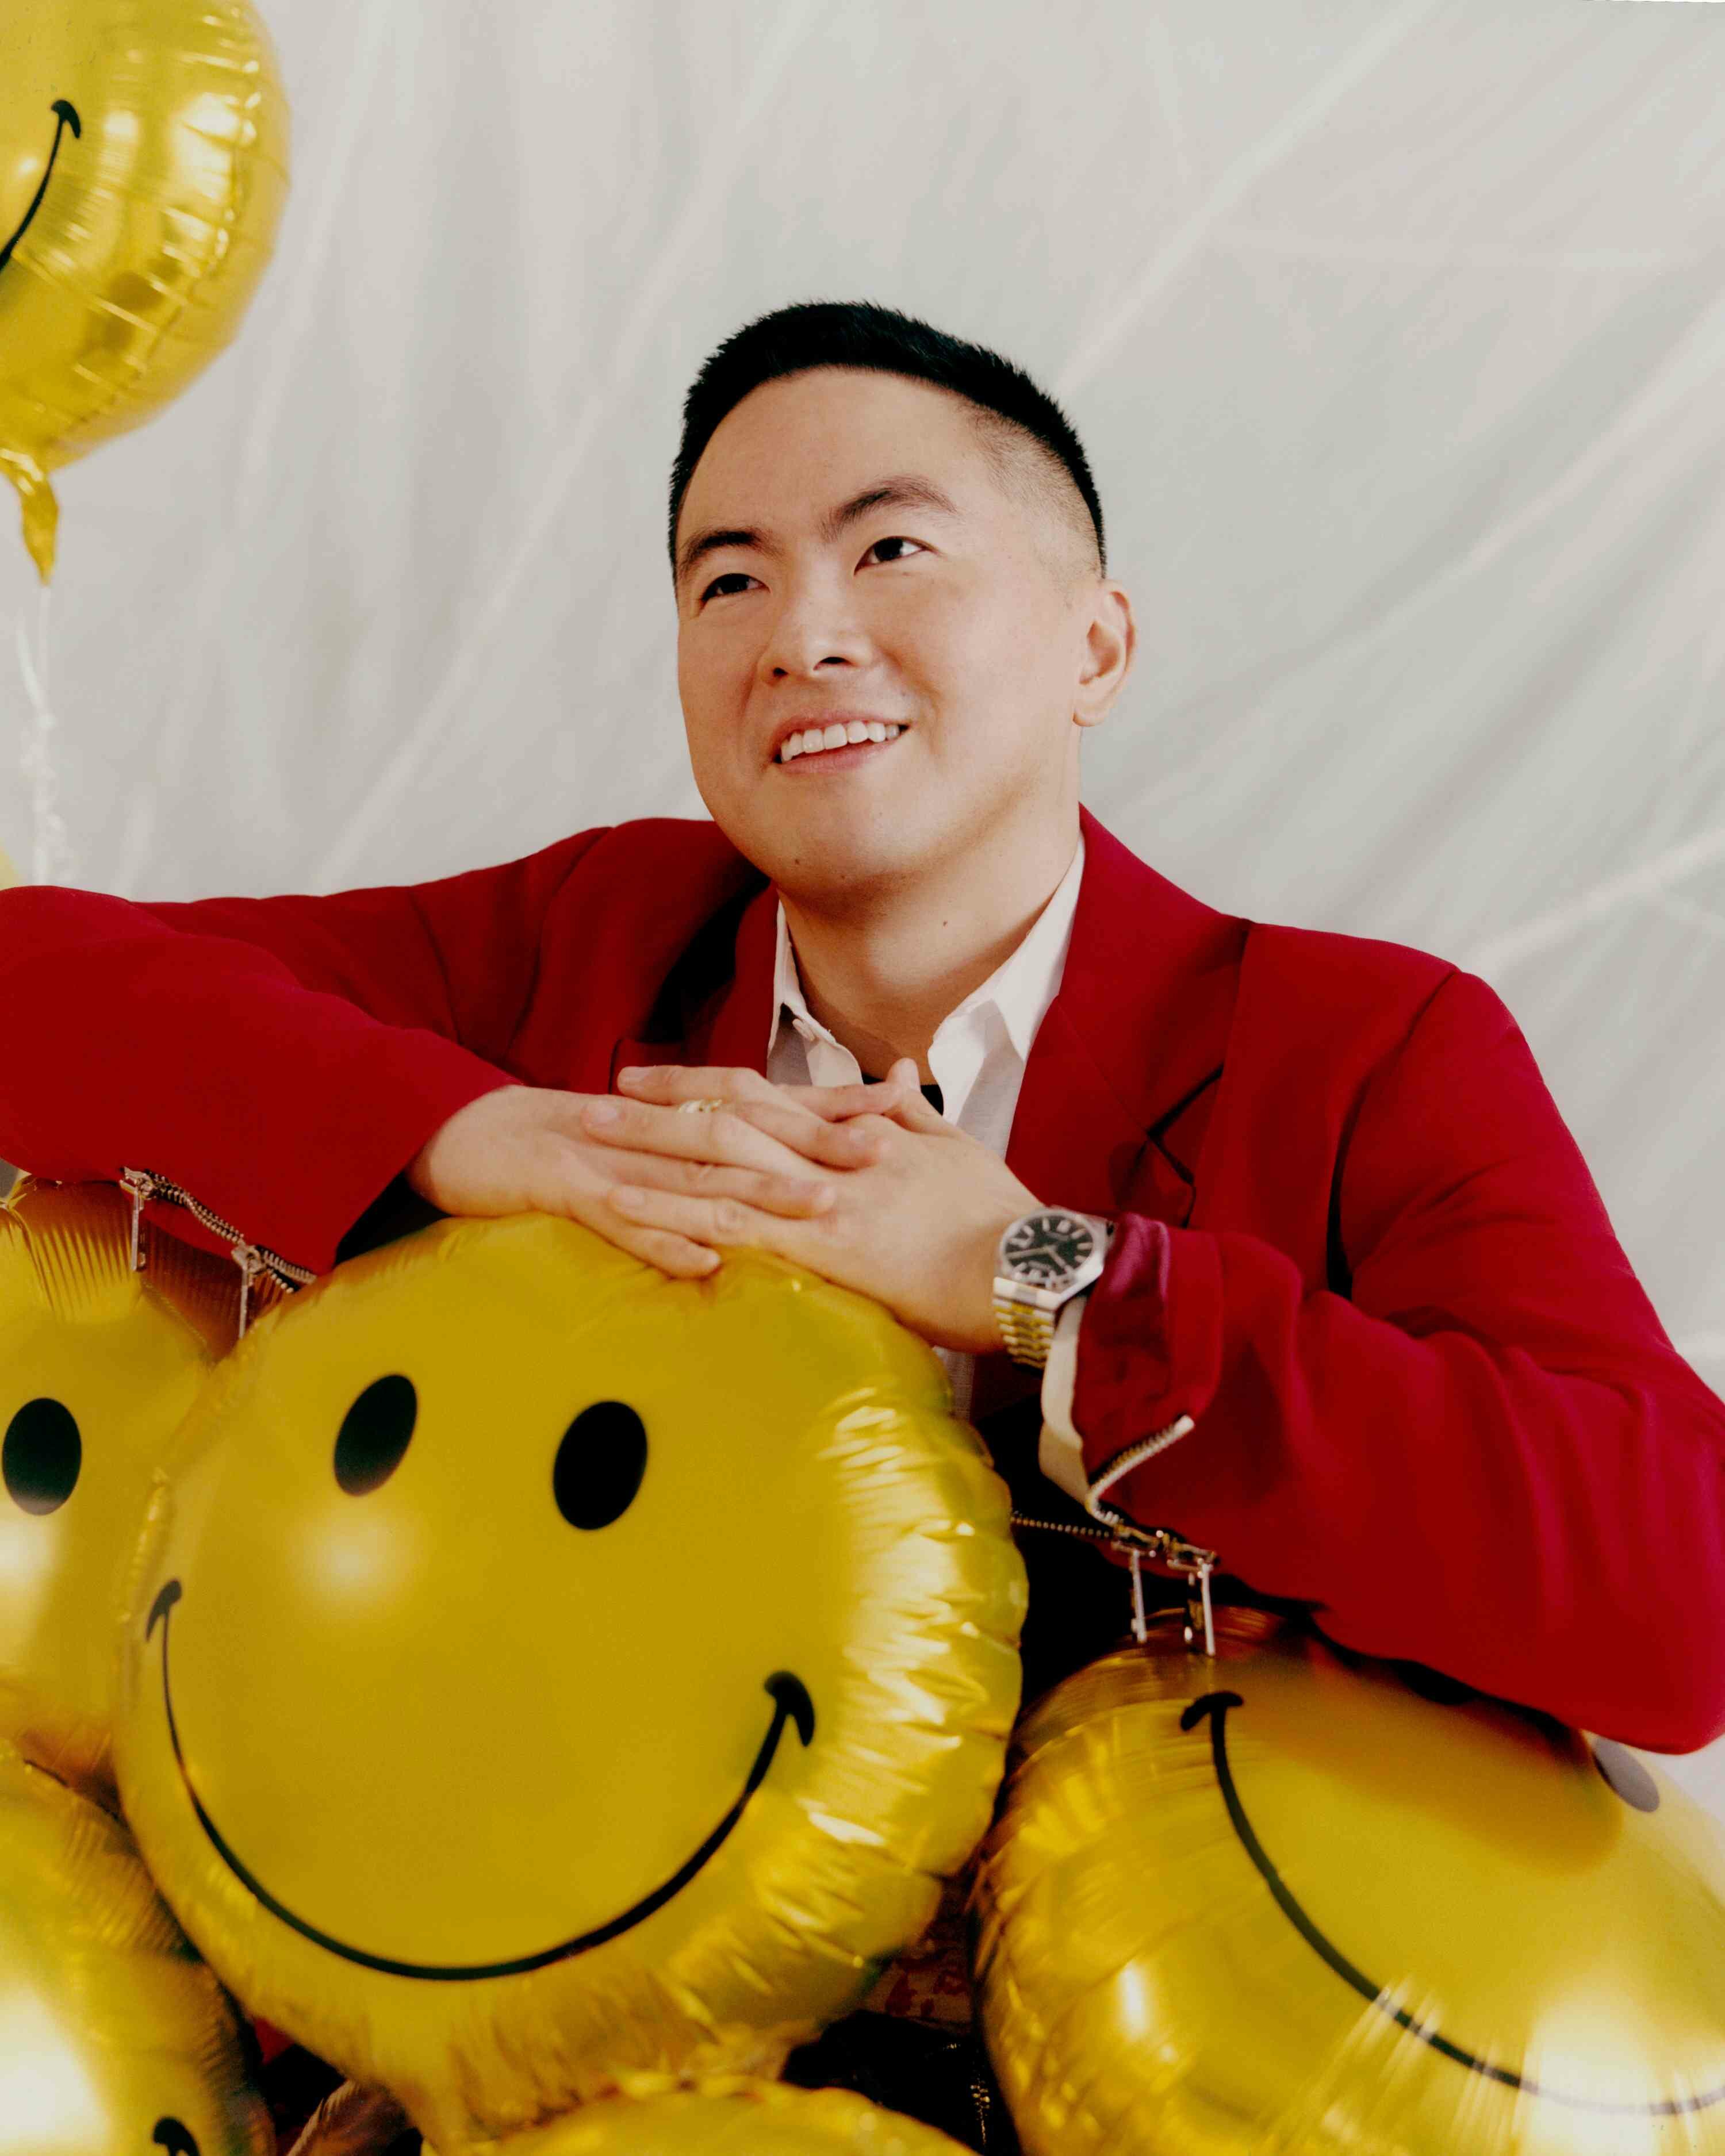 This Guy: Bowen Yang red suit smiley face balloons